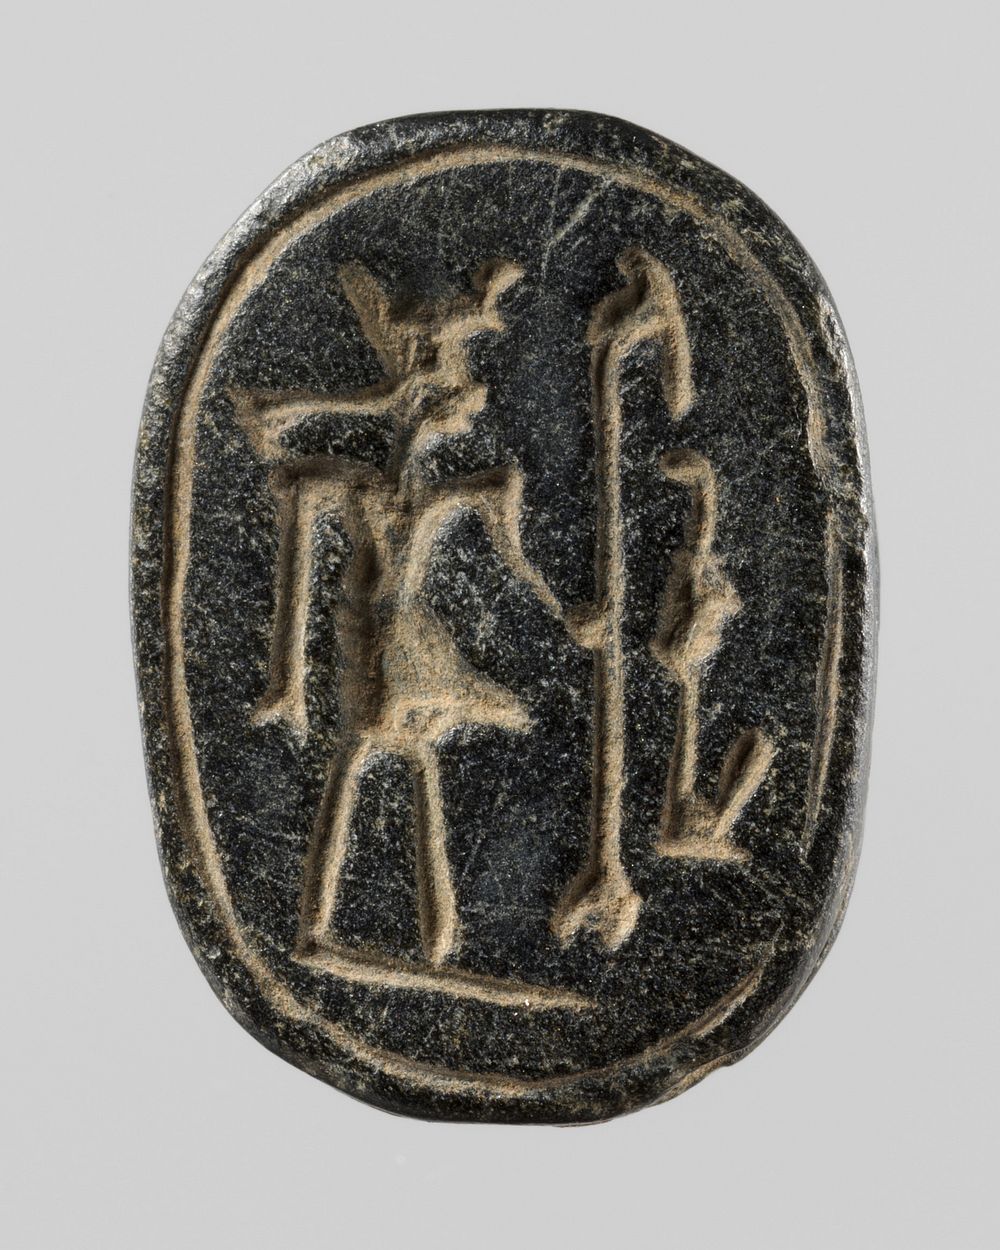 Scarab with Representation of Baal